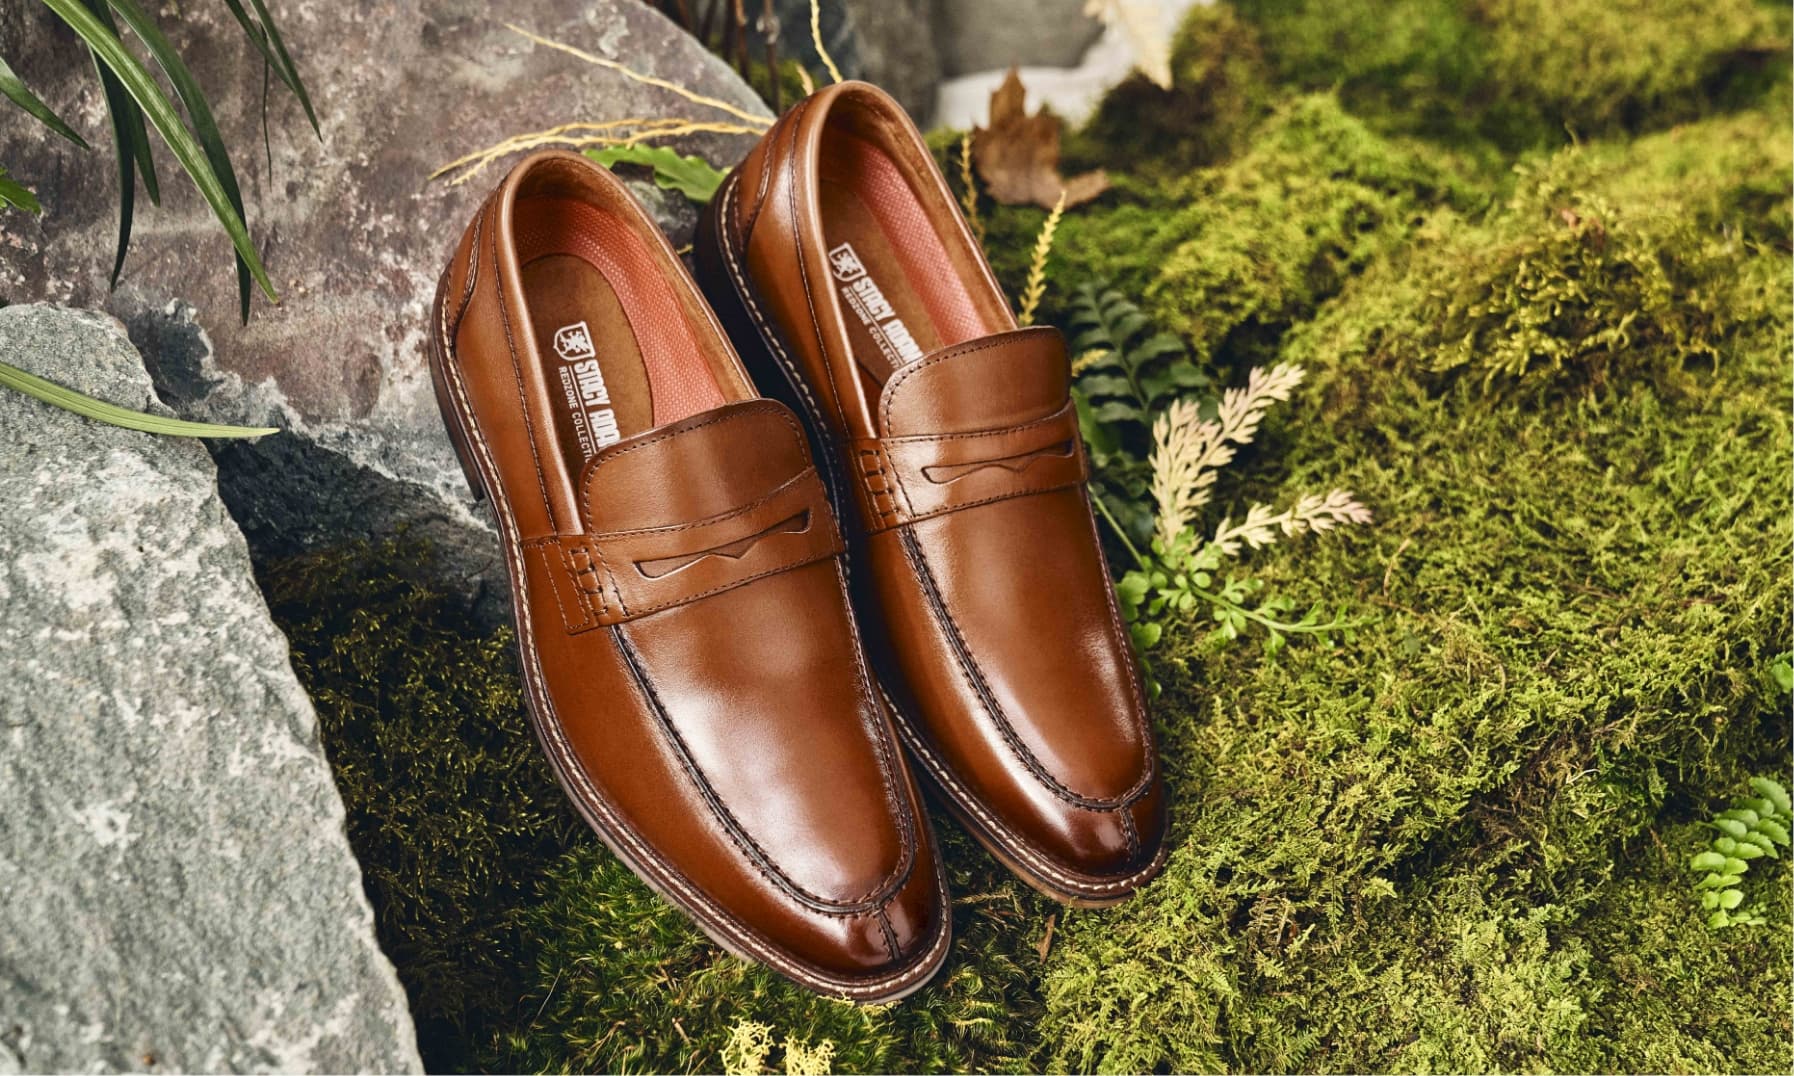 Click to shop Stacy Adams dress shoes. Image features the Marlowe in coganc. 